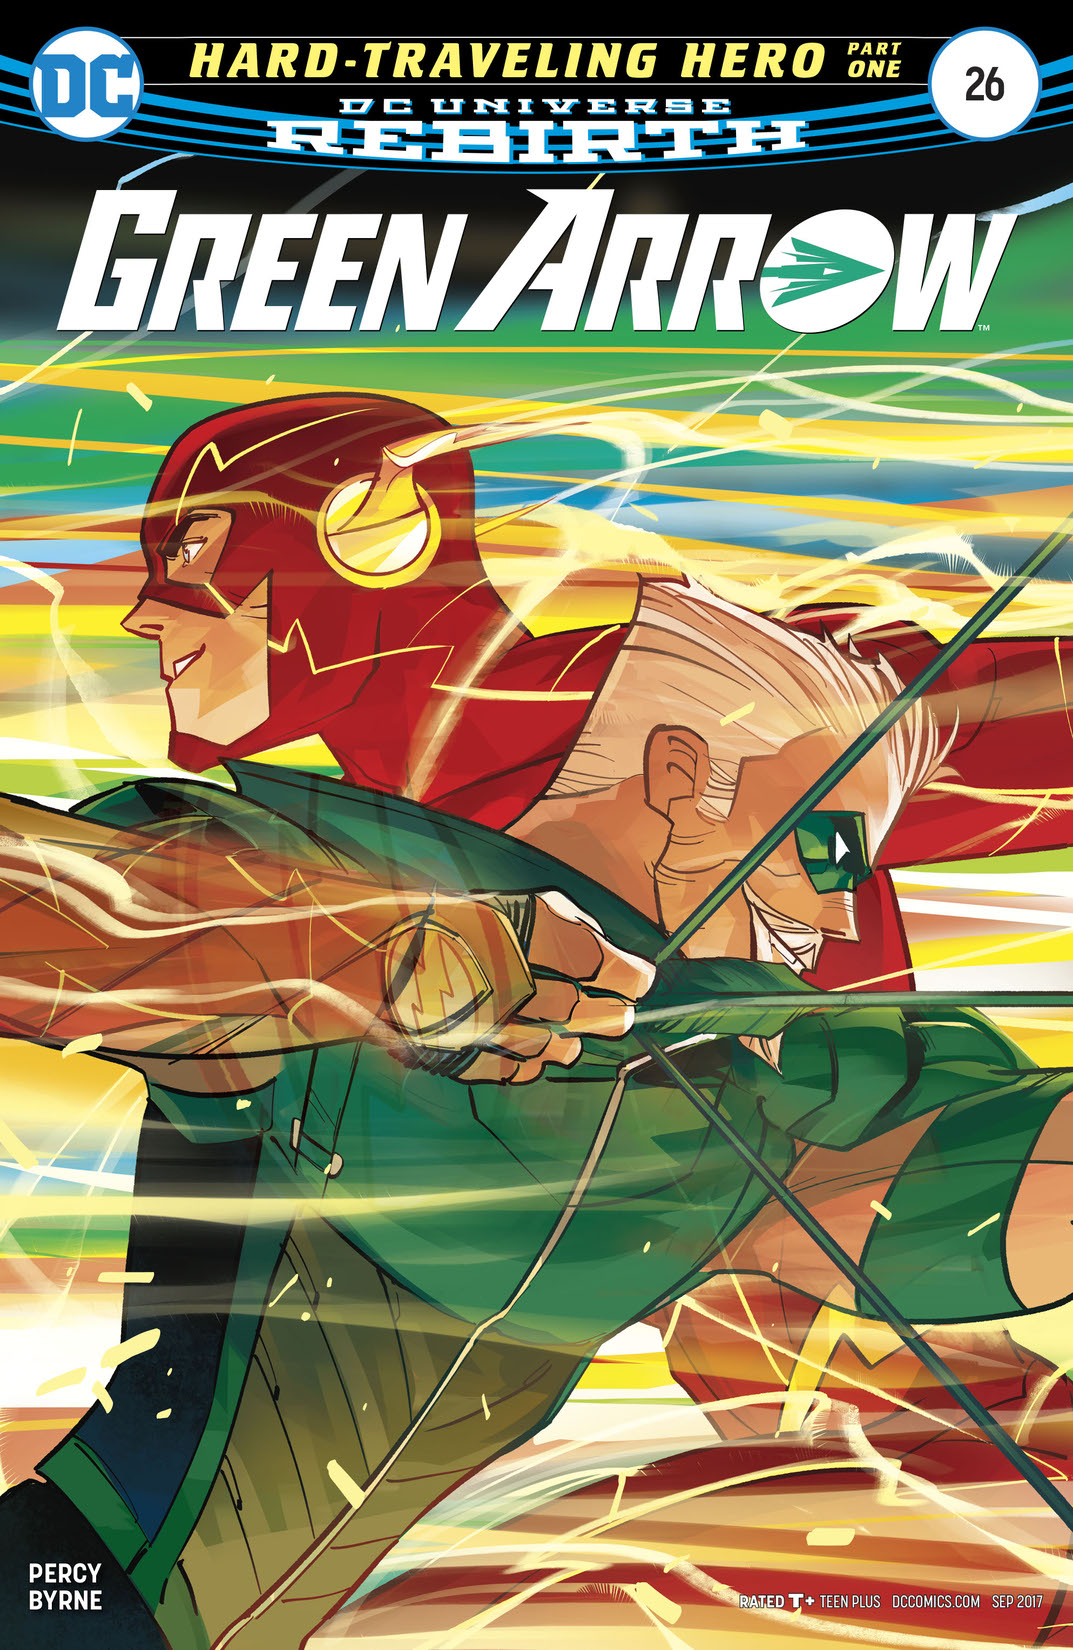 Green Arrow (2016-) #26 preview images